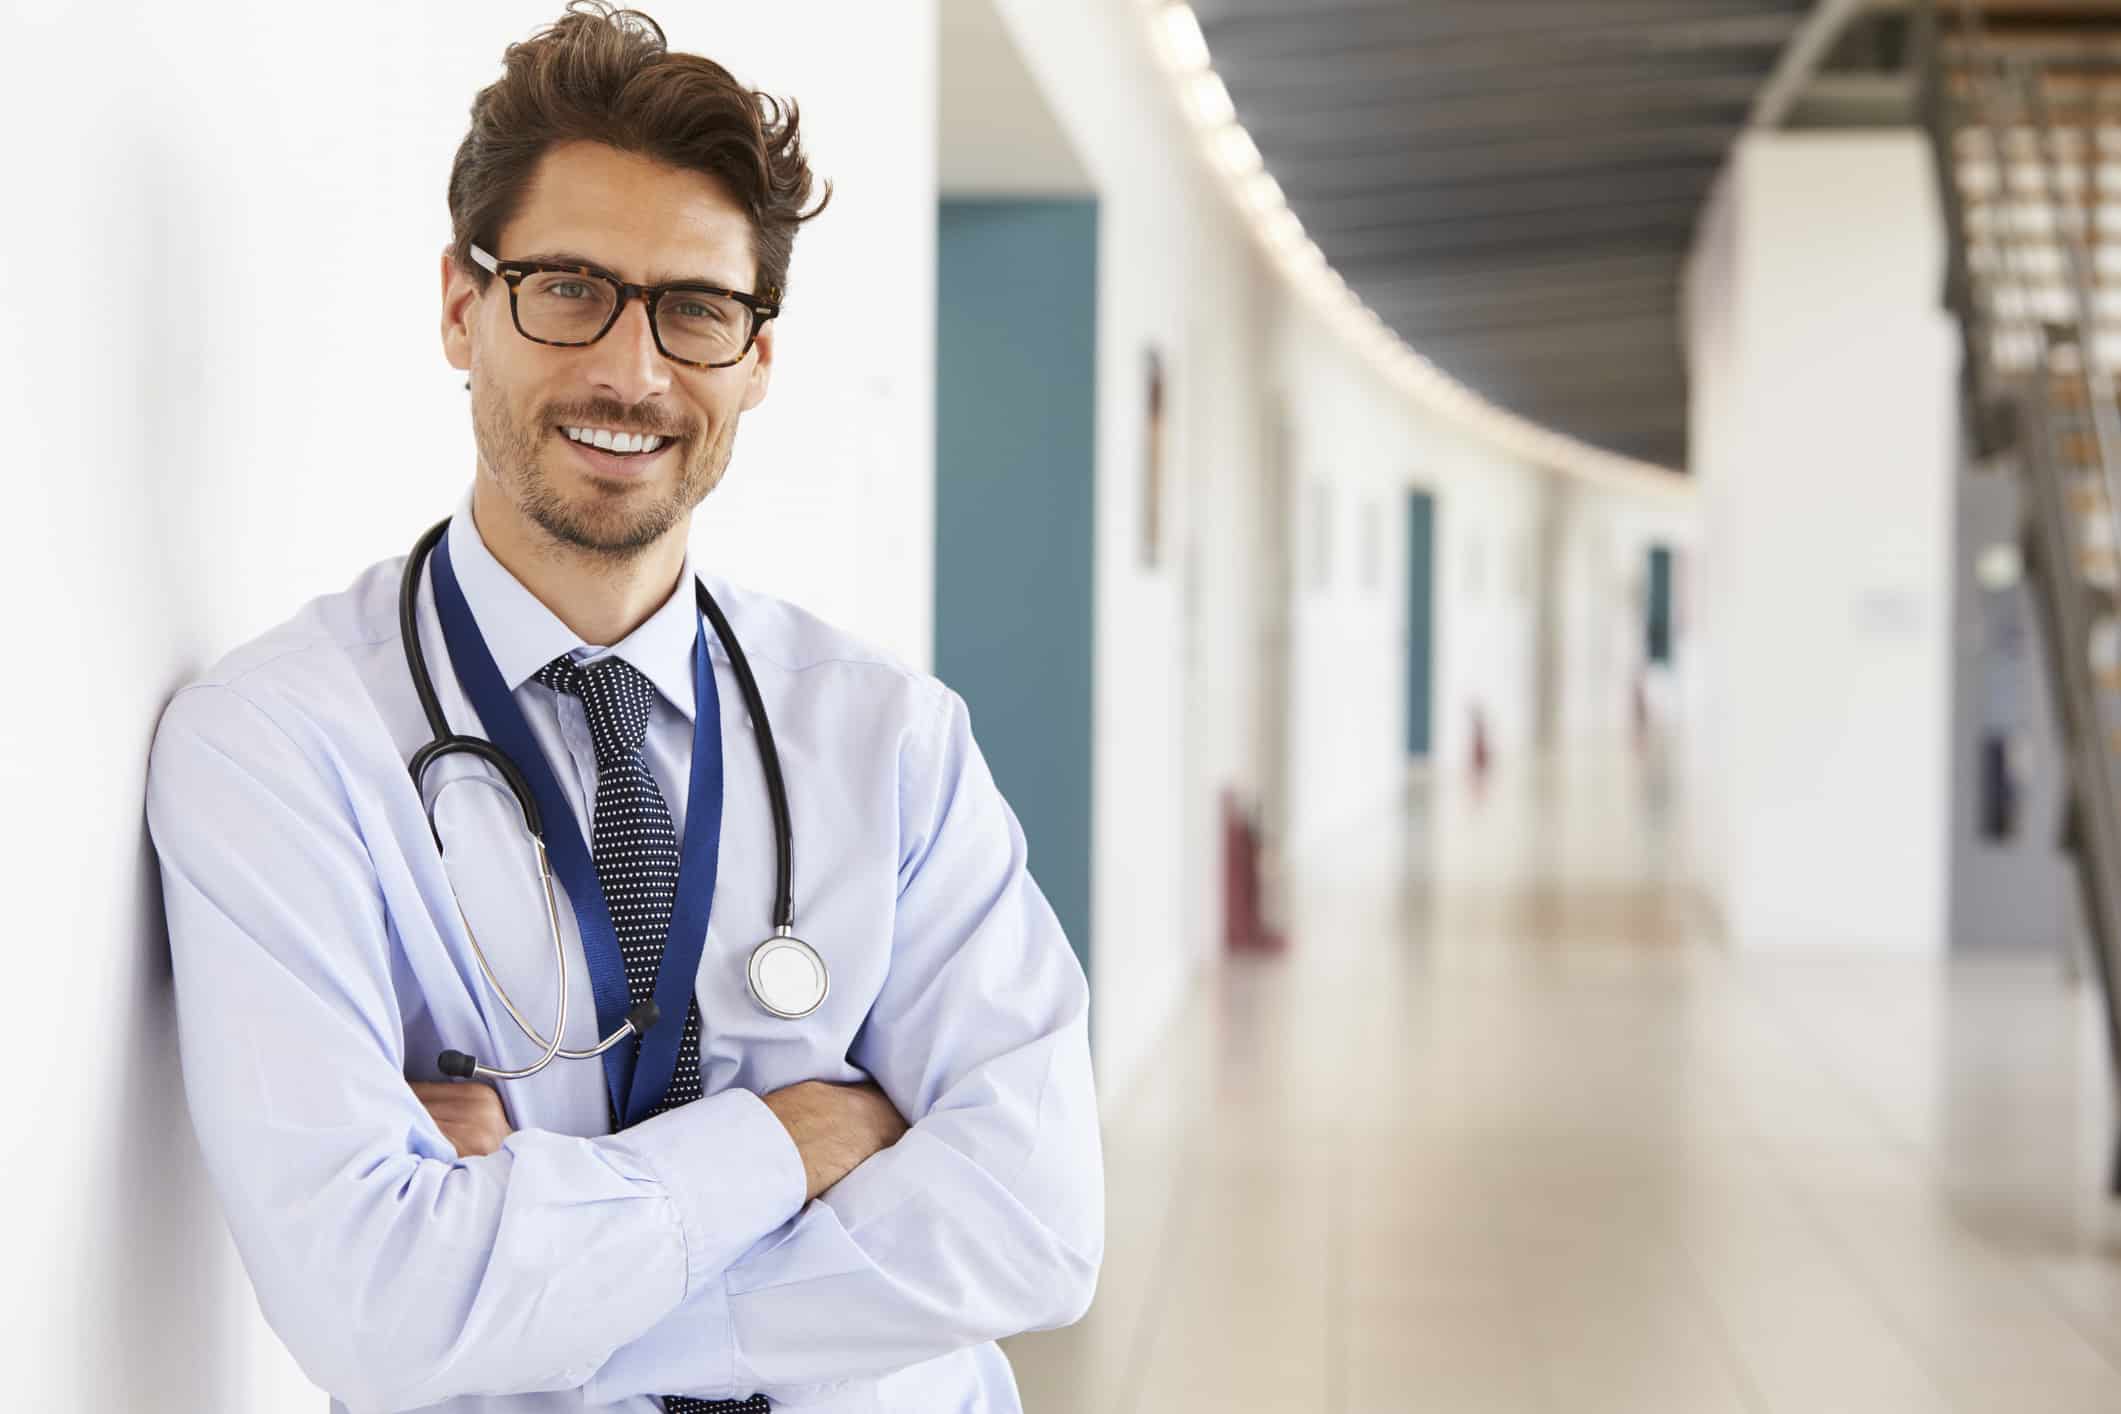 Looking for Job Security? Become a Locum Tenens Physician Annashae